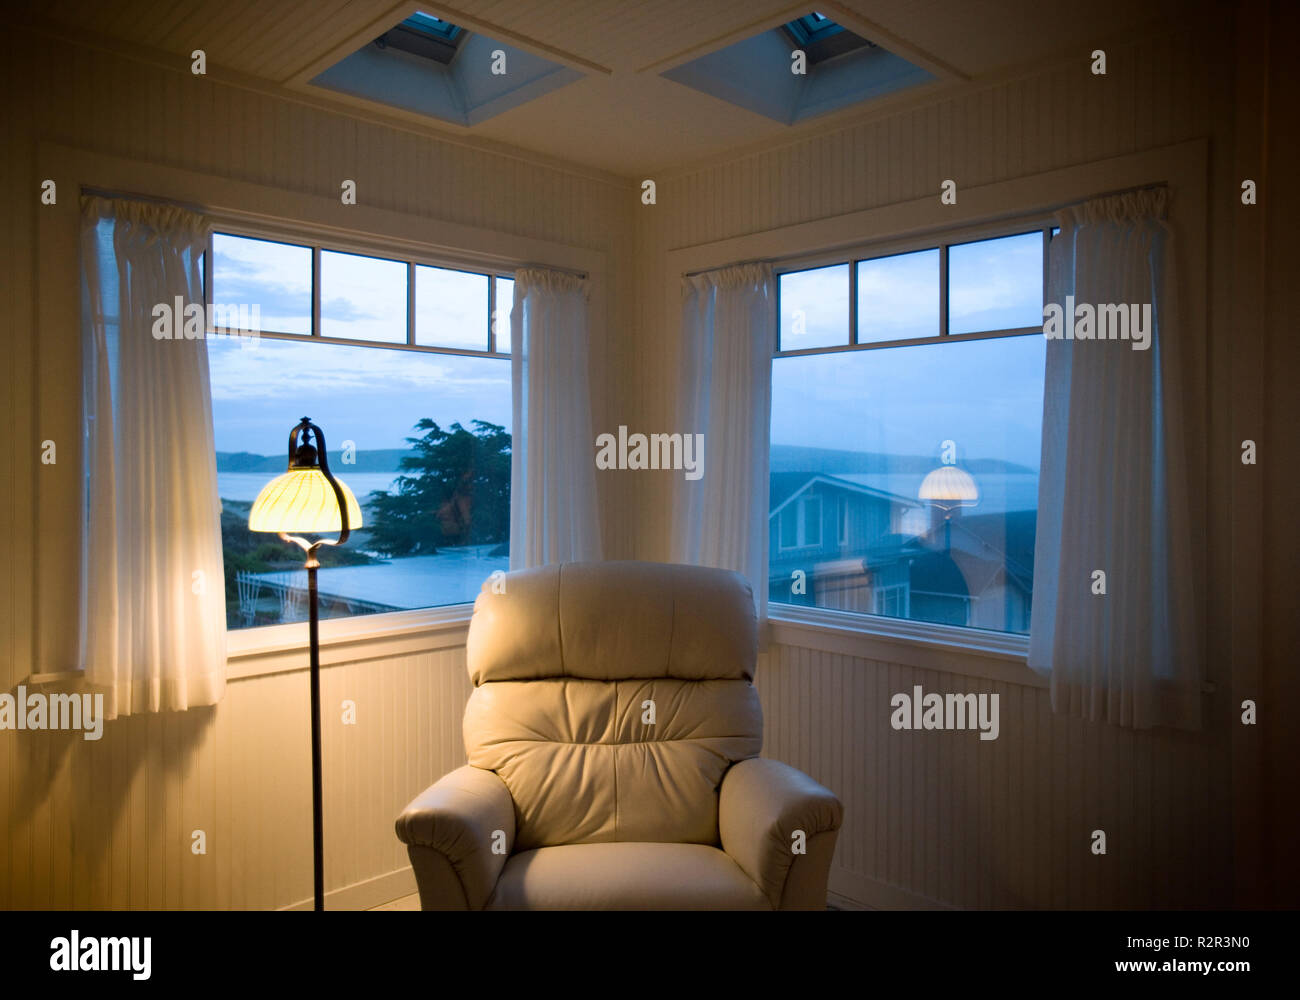 View of a cushioned chair in a room. Stock Photo